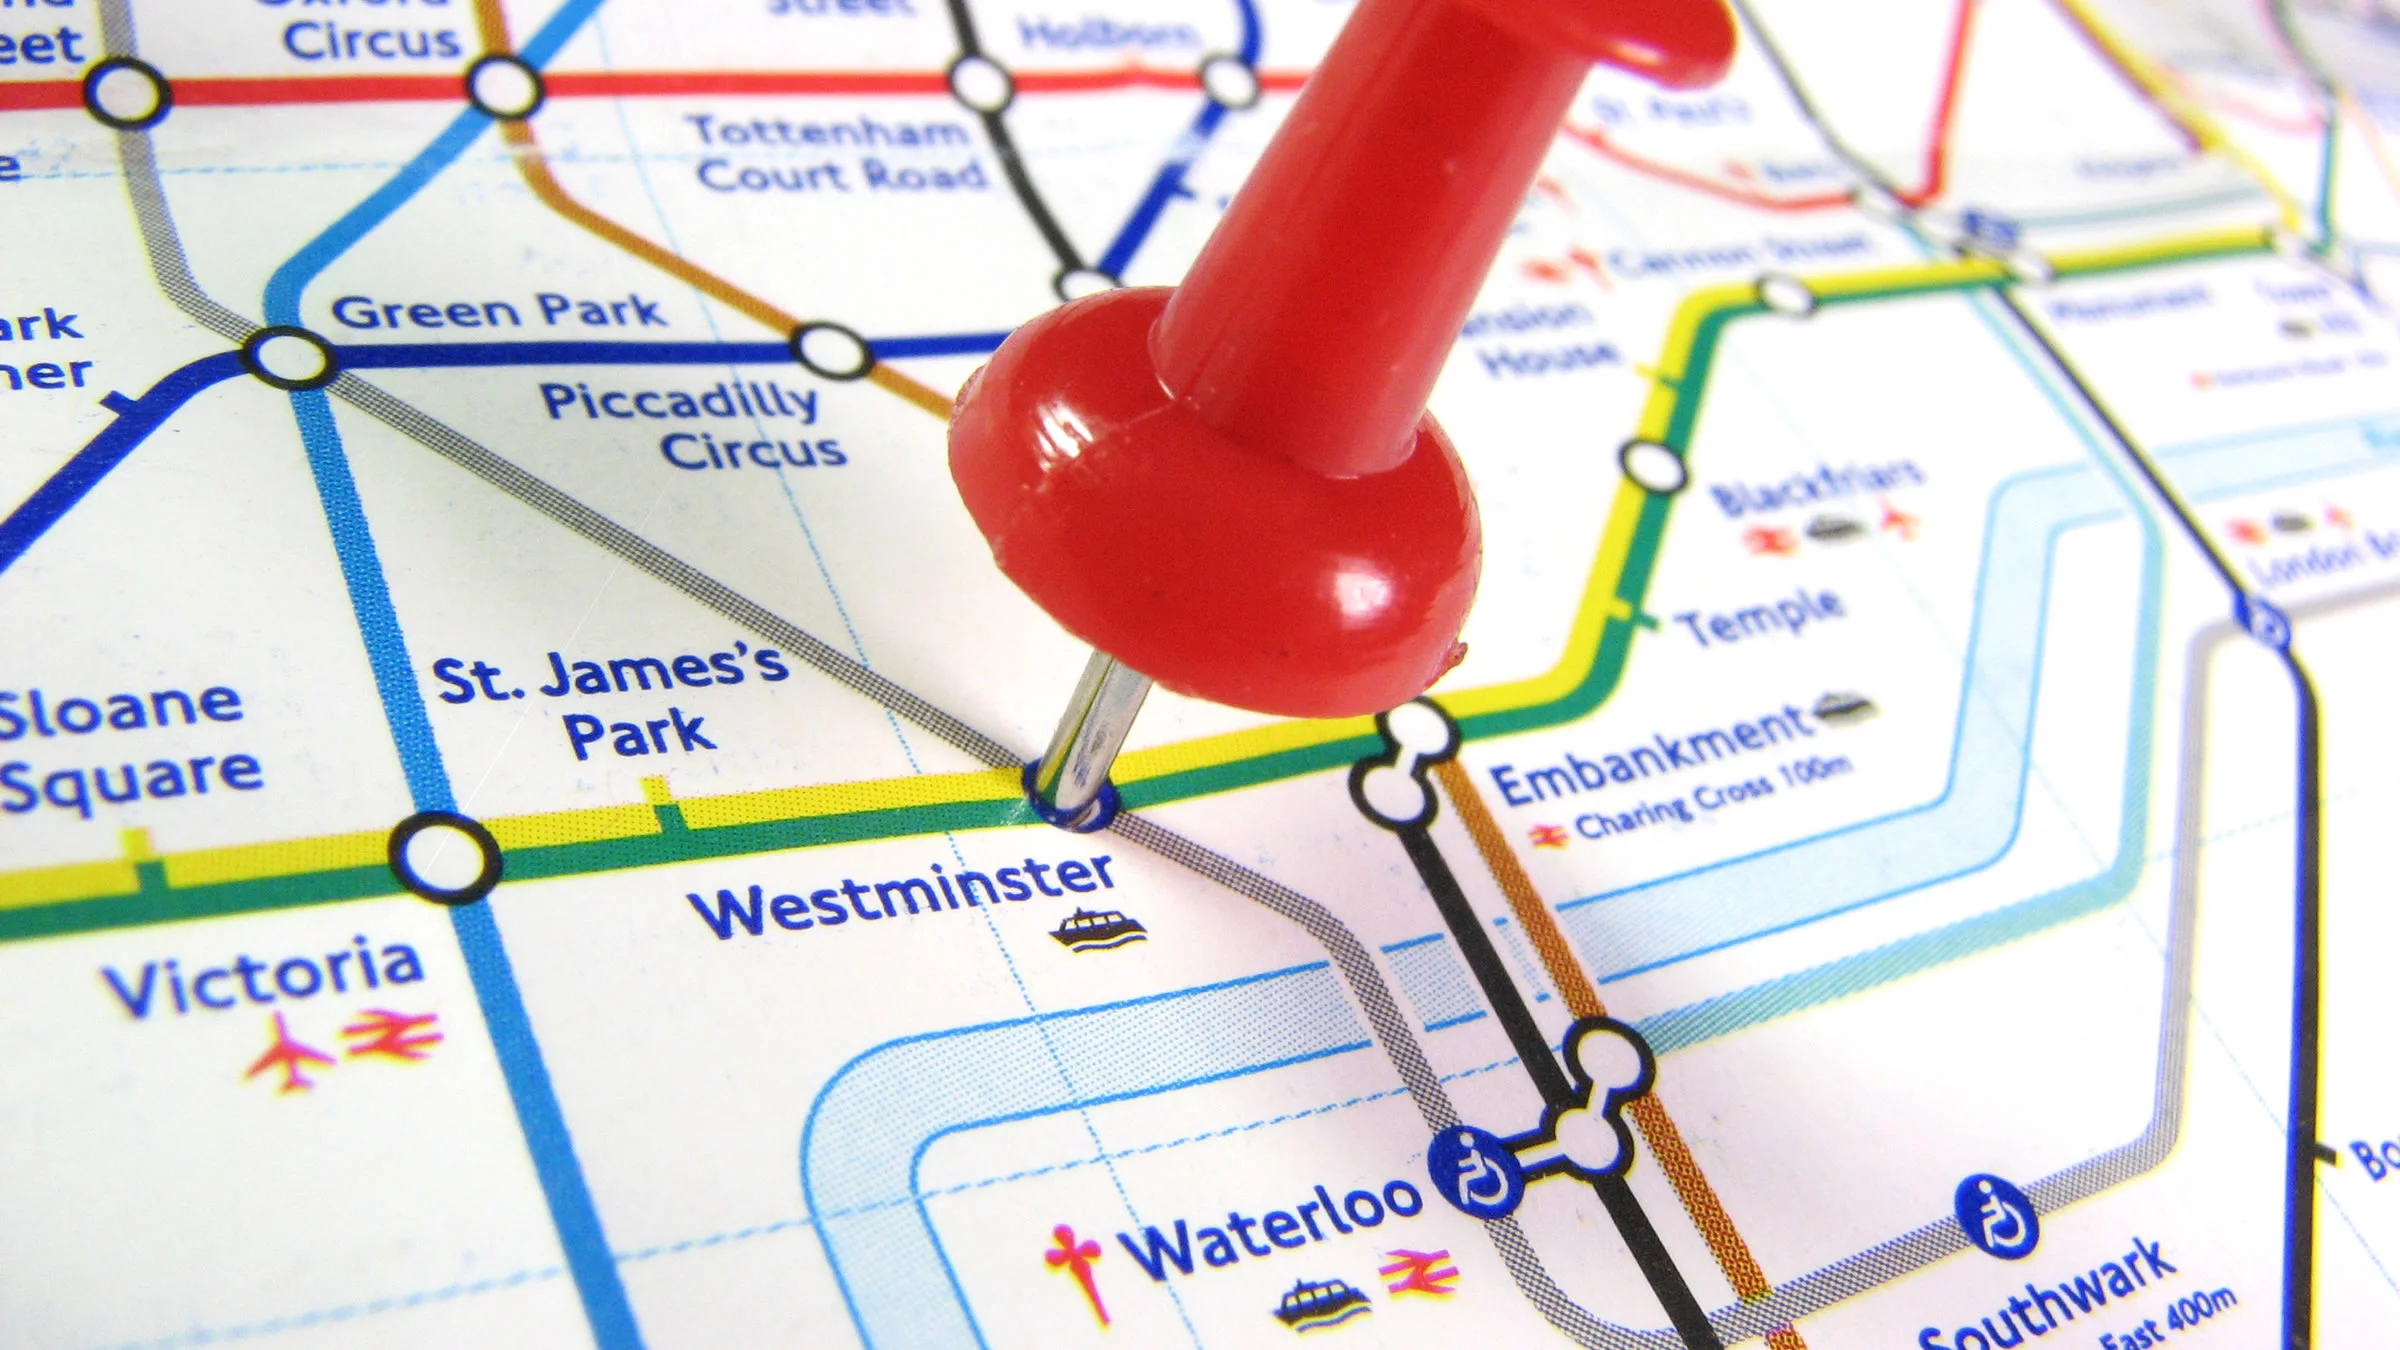 Getting around London on the tube